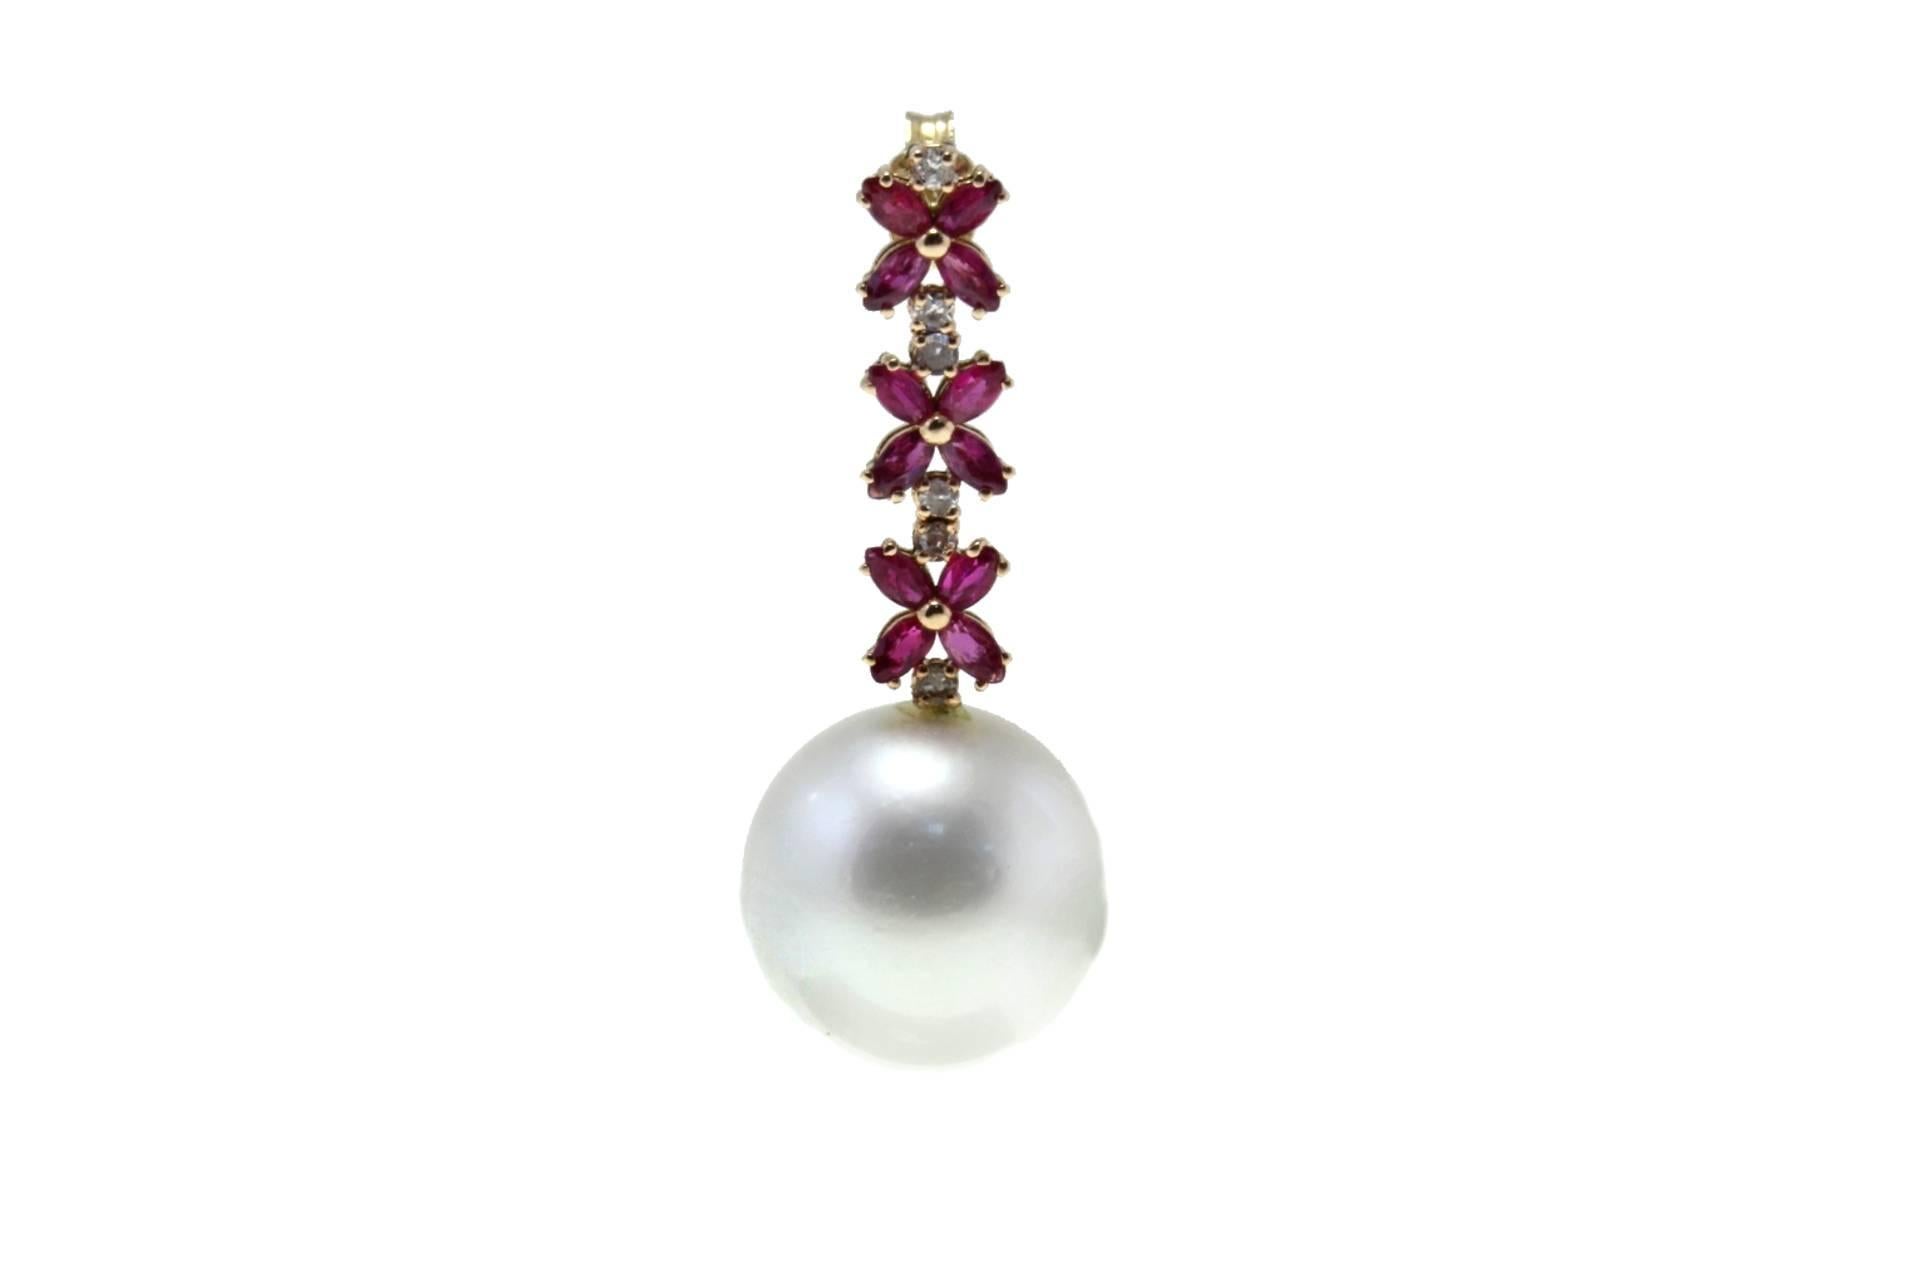 australian Pearl dangle earrings in 14kt rose  gold embellished with a stripe alterning diamonds and rubies flowers.

pearl: 14mm/ 0.55inch
tot weight 11.4gr
r.f.  grro